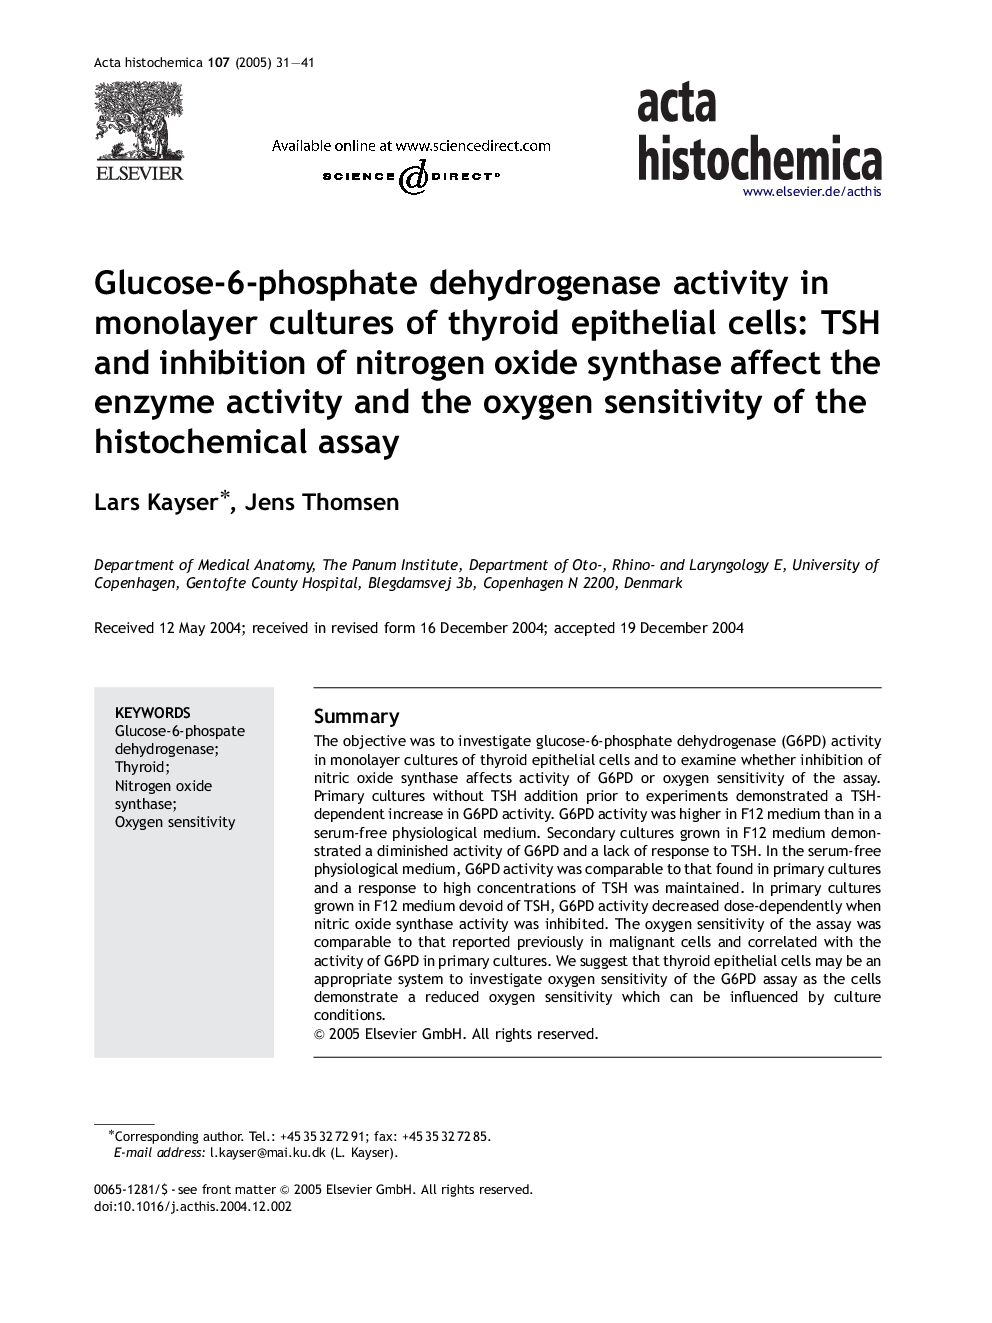 Glucose-6-phosphate dehydrogenase activity in monolayer cultures of thyroid epithelial cells: TSH and inhibition of nitrogen oxide synthase affect the enzyme activity and the oxygen sensitivity of the histochemical assay